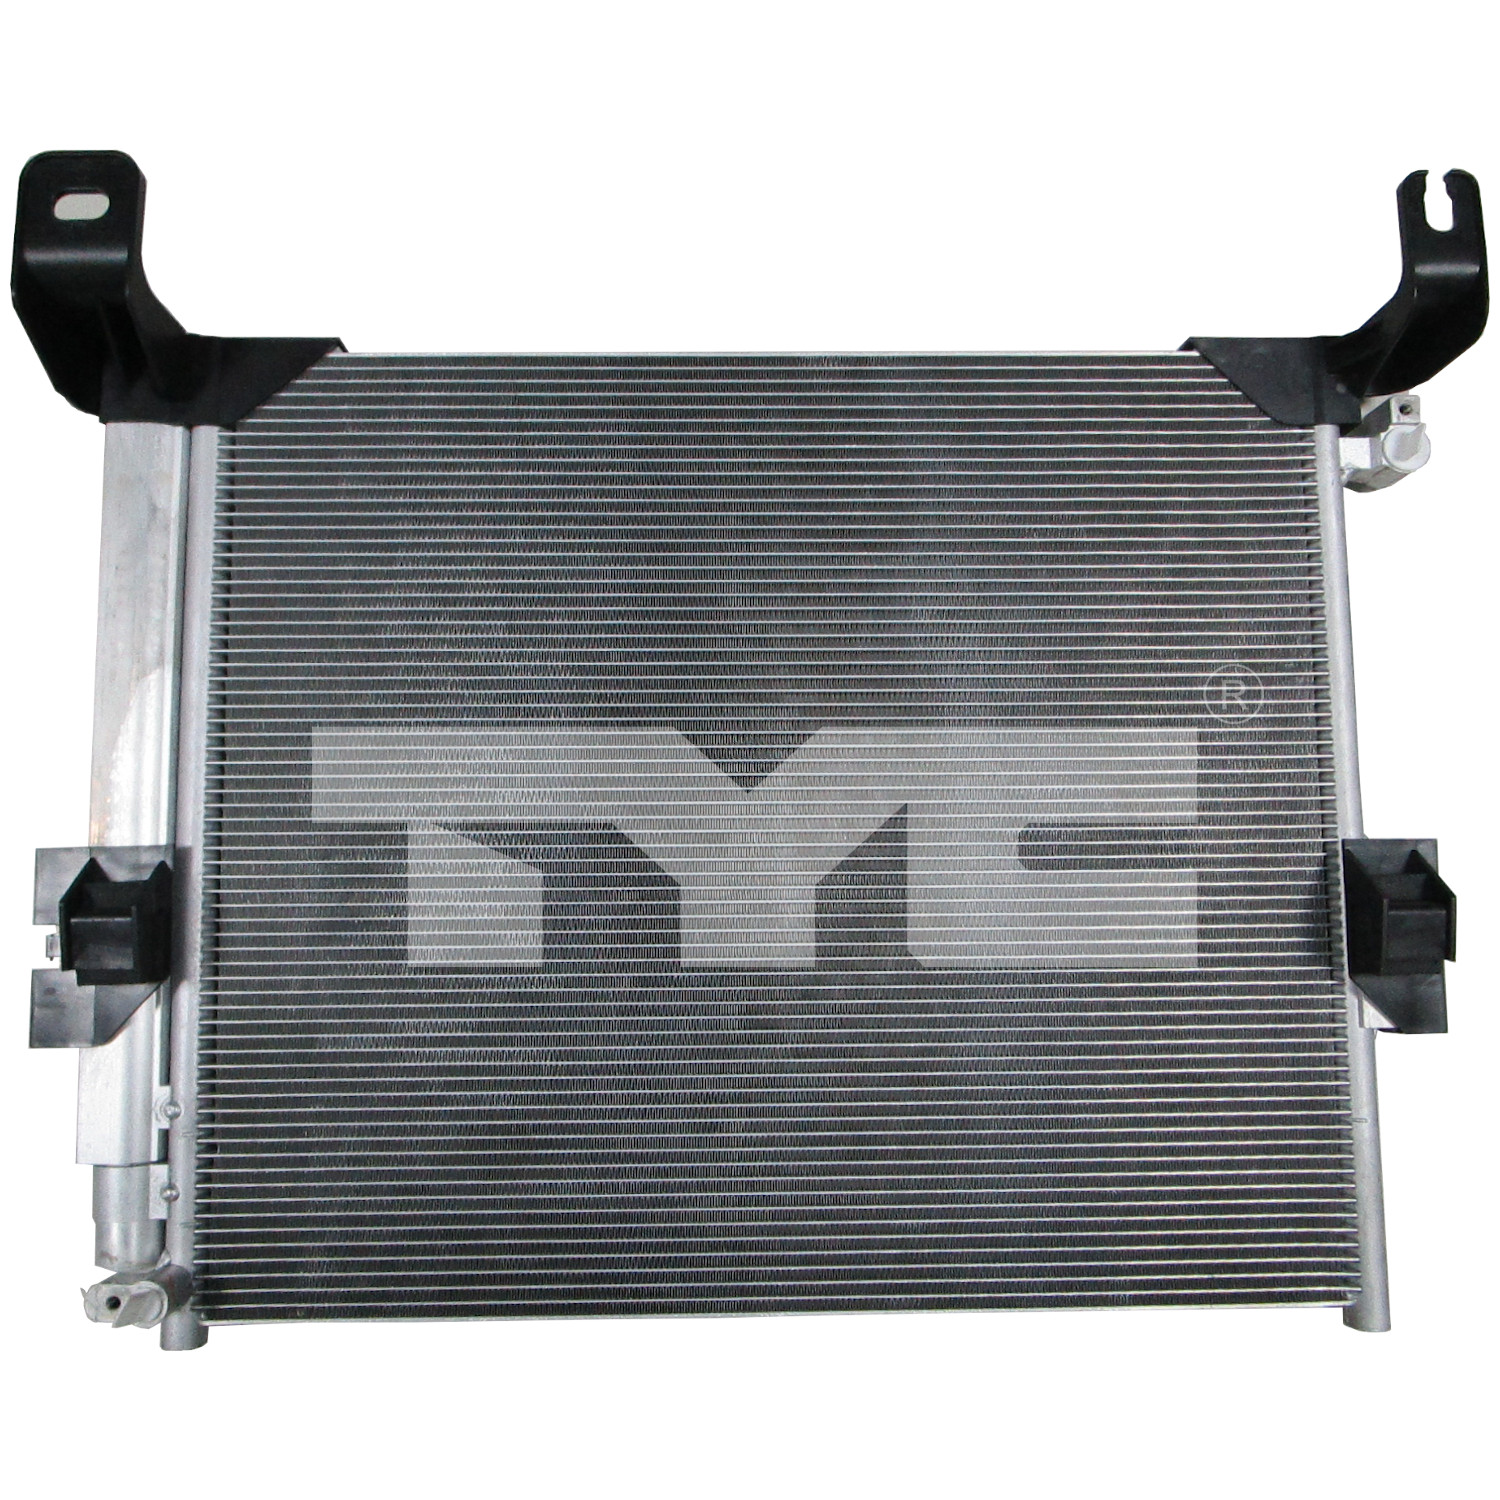 Aftermarket AC CONDENSERS for TOYOTA - TACOMA, TACOMA,12-15,Air conditioning condenser